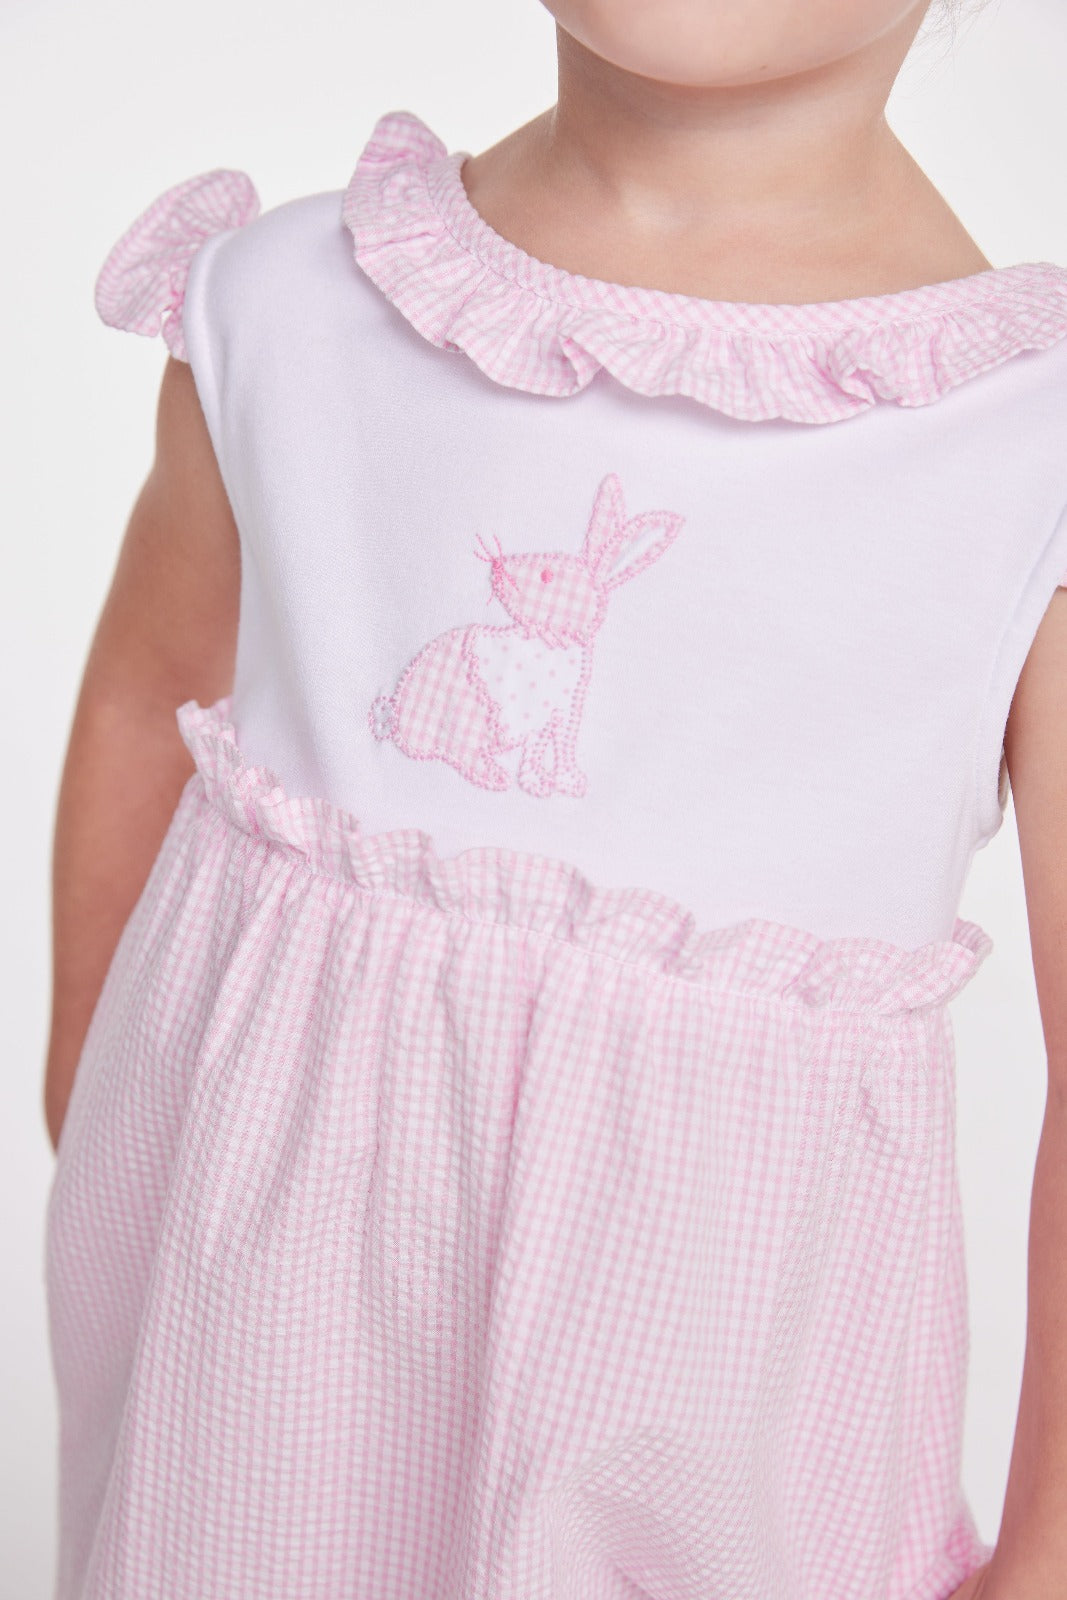 seguridadindustrialcr girl's pink easter dress, sleeveless dress with patchwork bunny applique